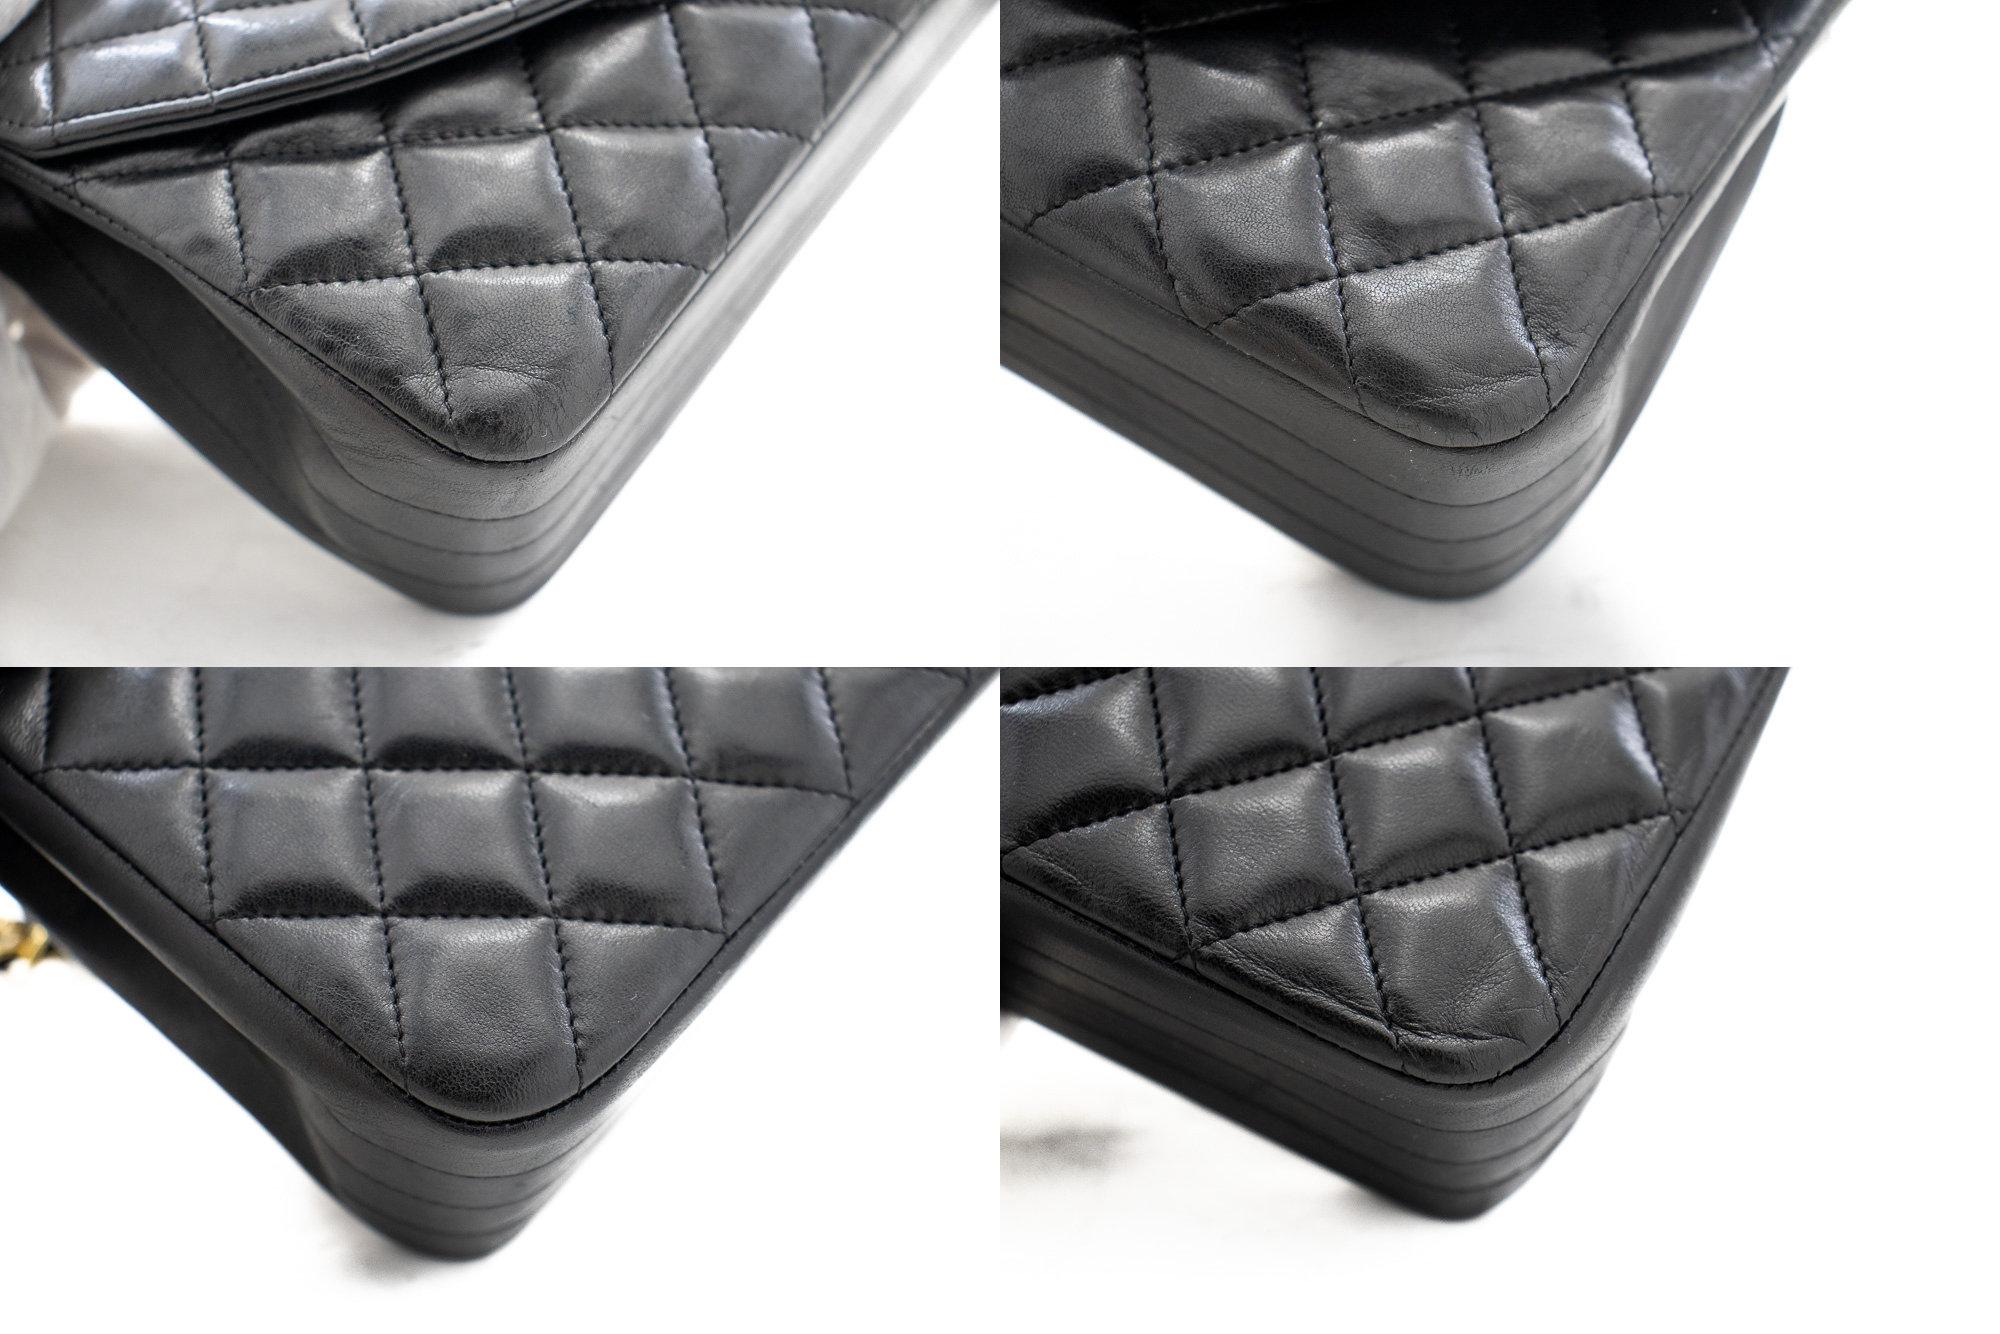 CHANEL Half Moon Chain Shoulder Crossbody Bag Black Flap Quilted In Good Condition For Sale In Takamatsu-shi, JP